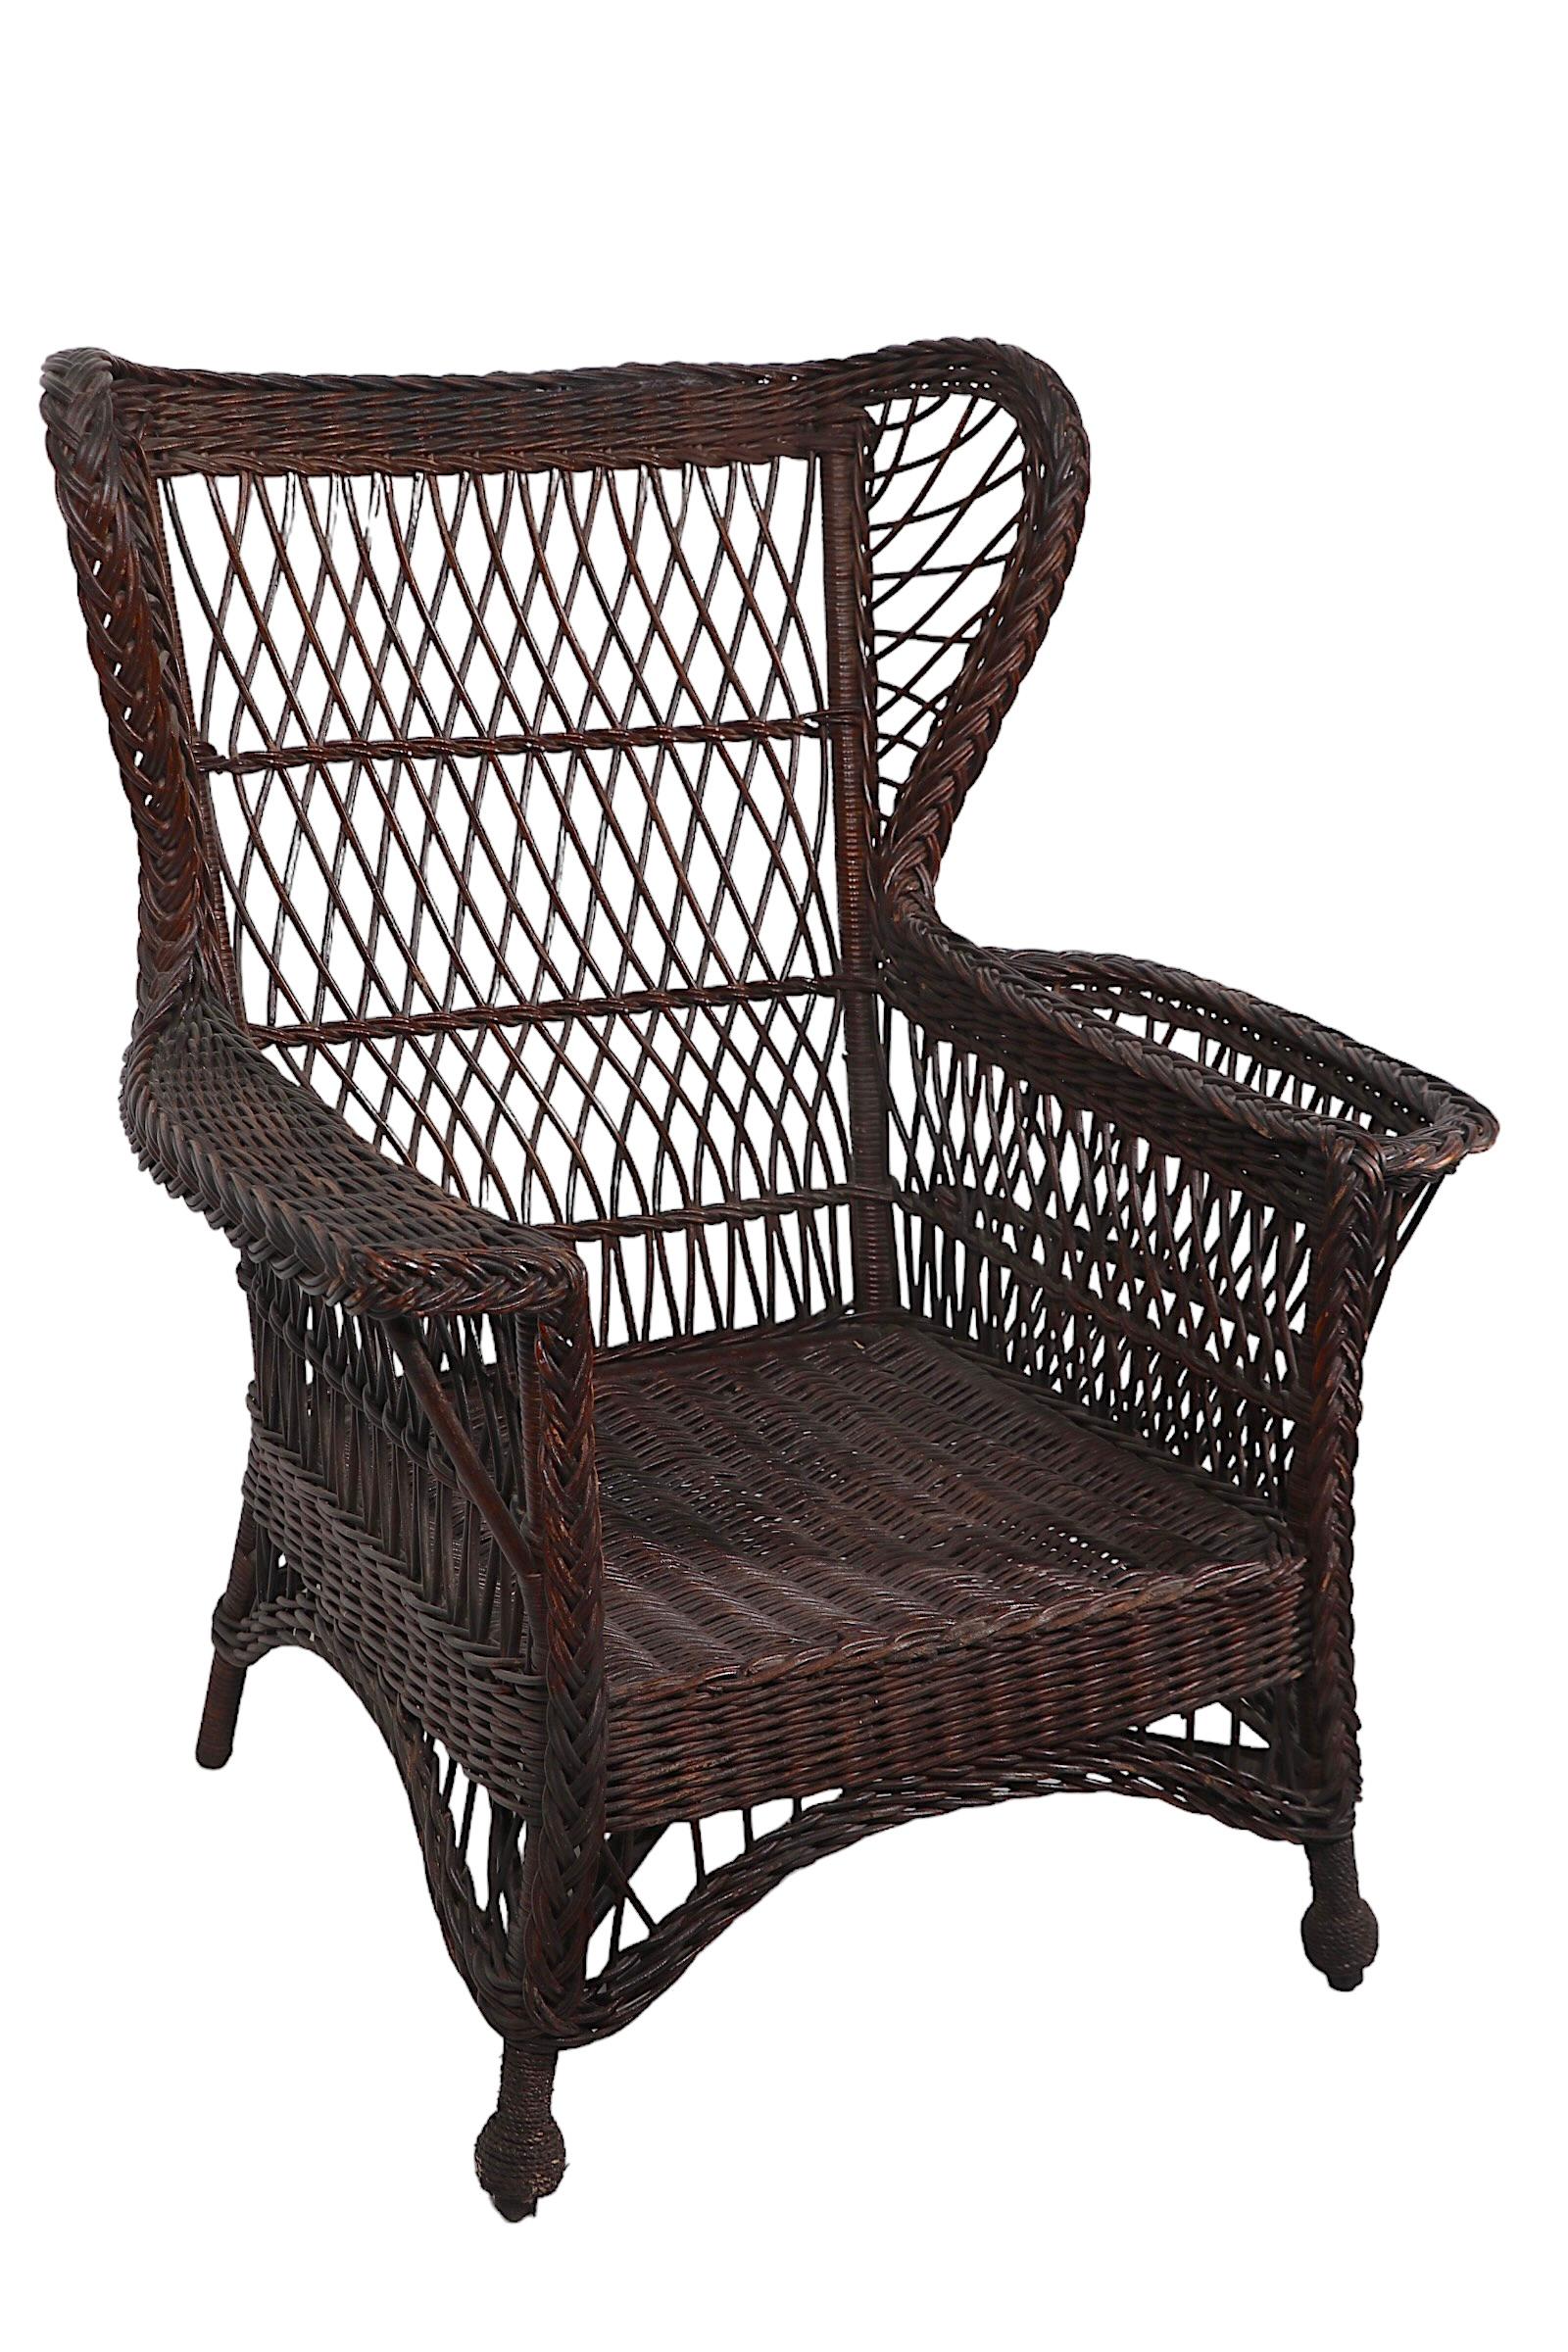 Victorian Bar Harbor Wicker Wing Chair with Magazine Rack Arm For Sale 11